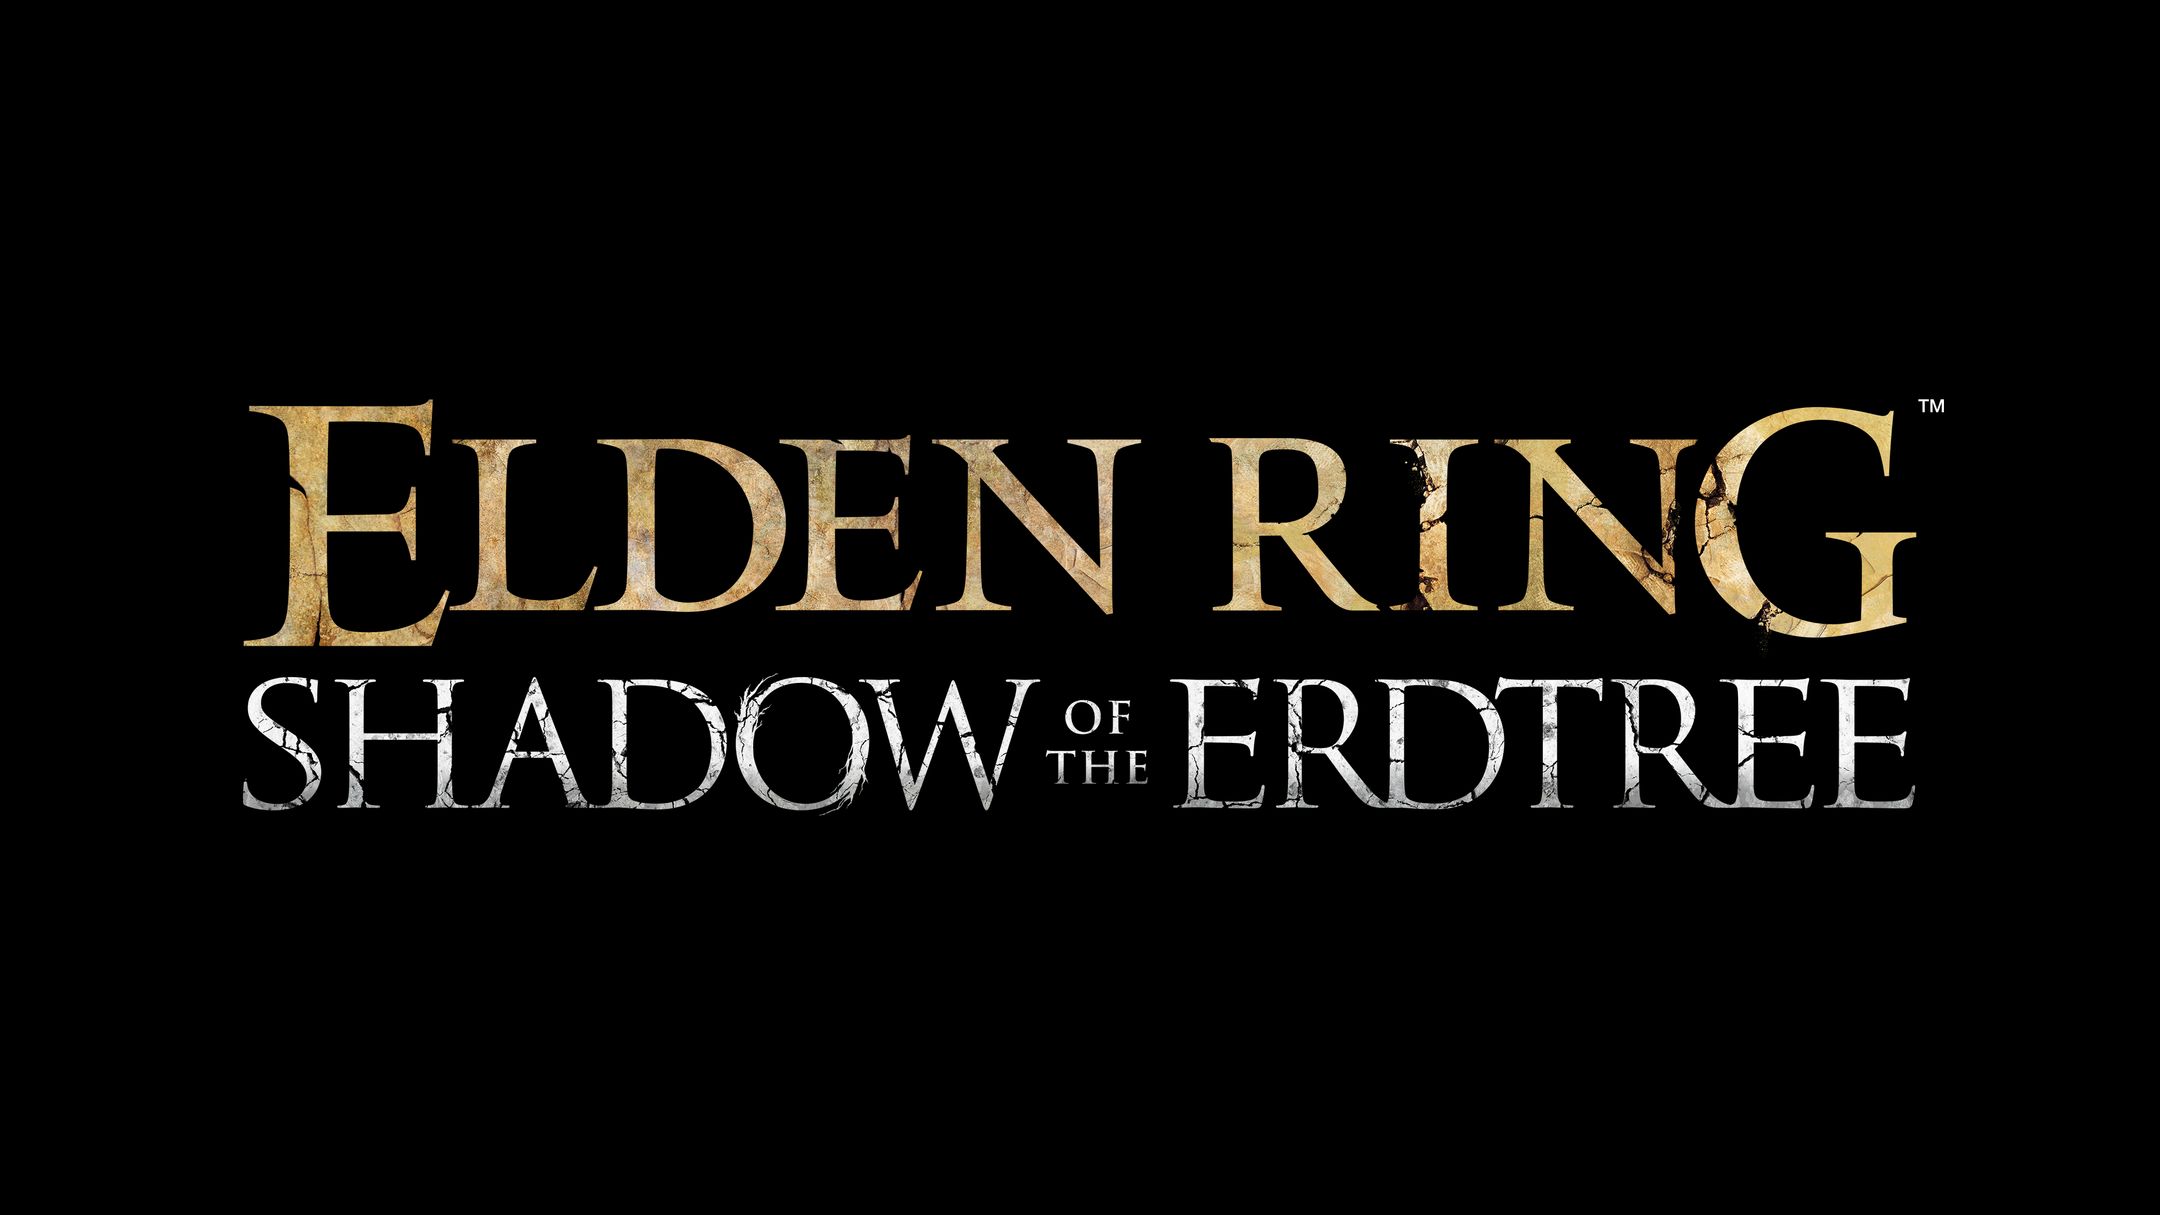 Elden Ring: Shadow of the Erdtree’s first trailer drops on February 21